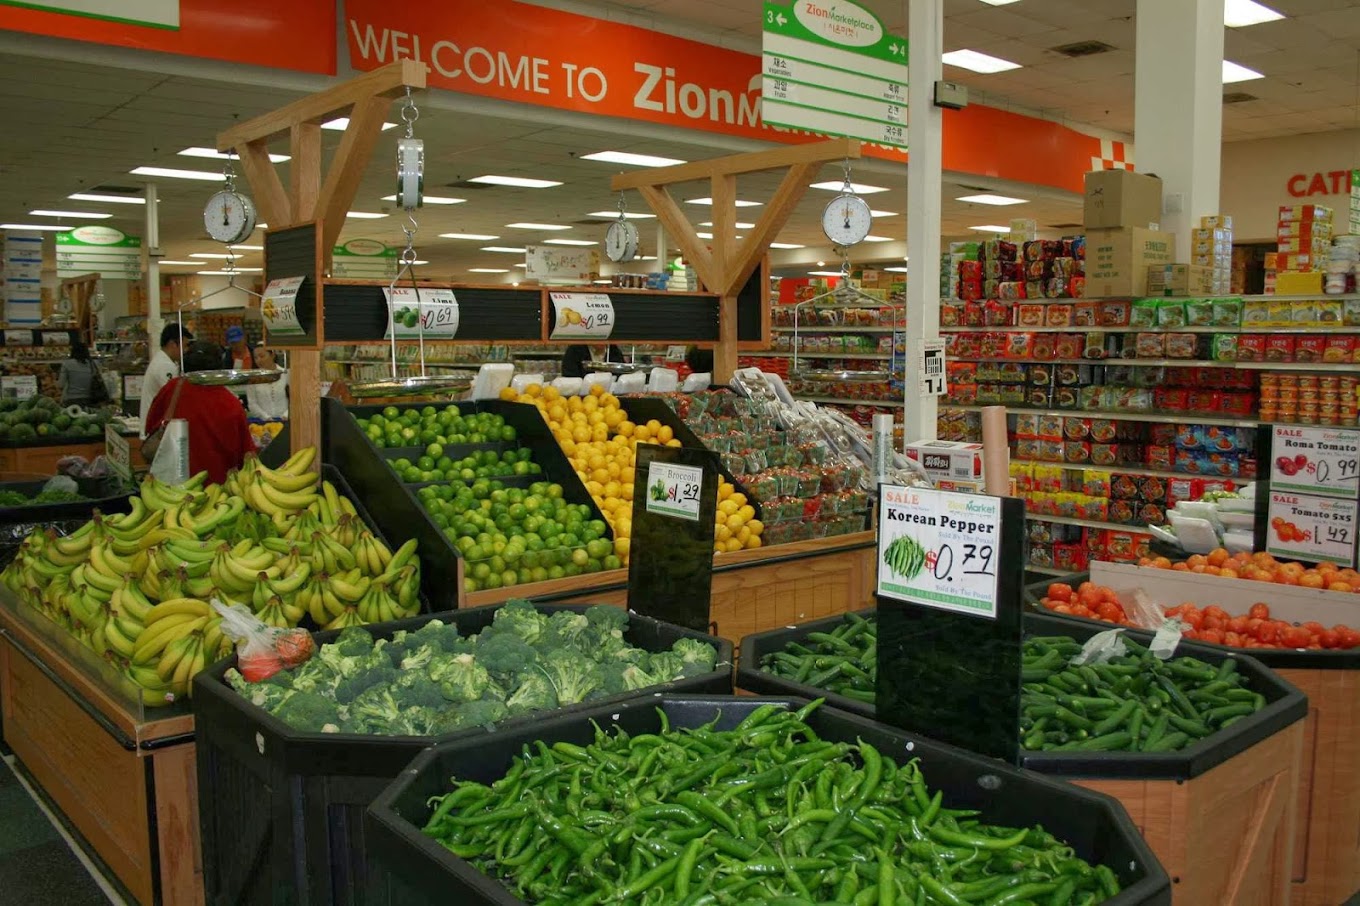 Zion Market One Of the Best Asian Grocery Stores in San Diego